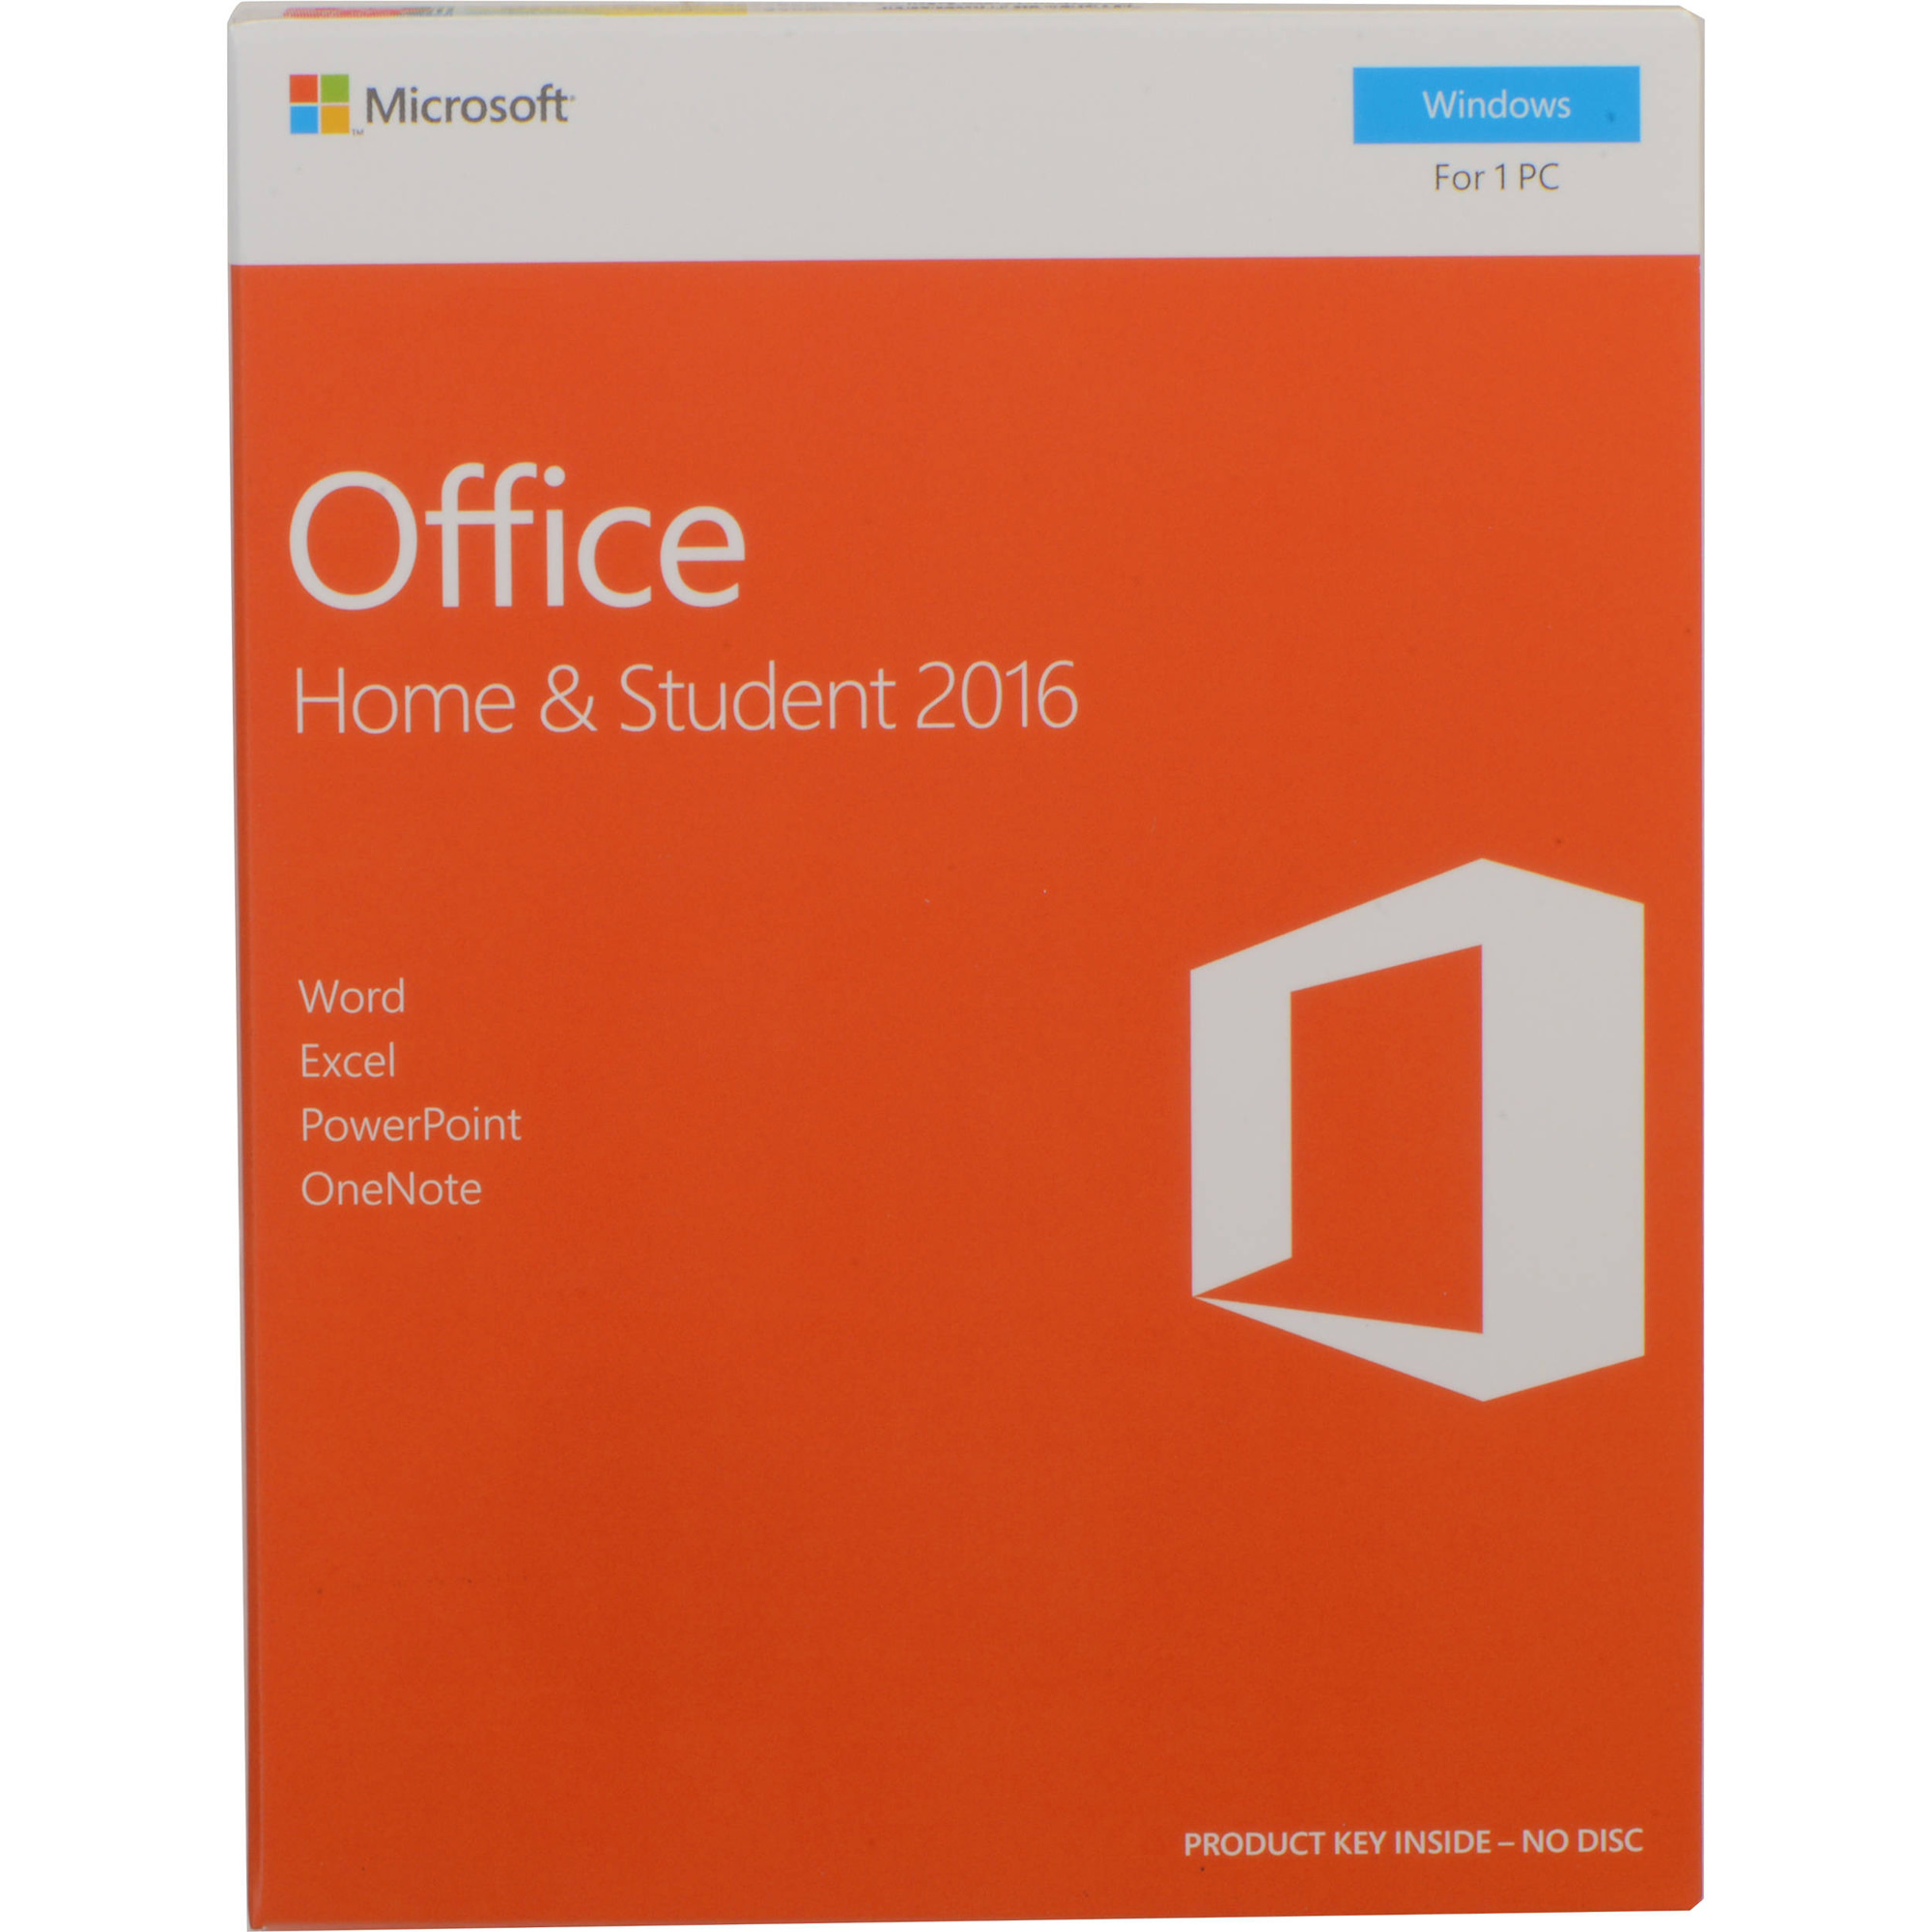 Microsoft Office Home & Student 2016 (PC) - English - image 1 of 7